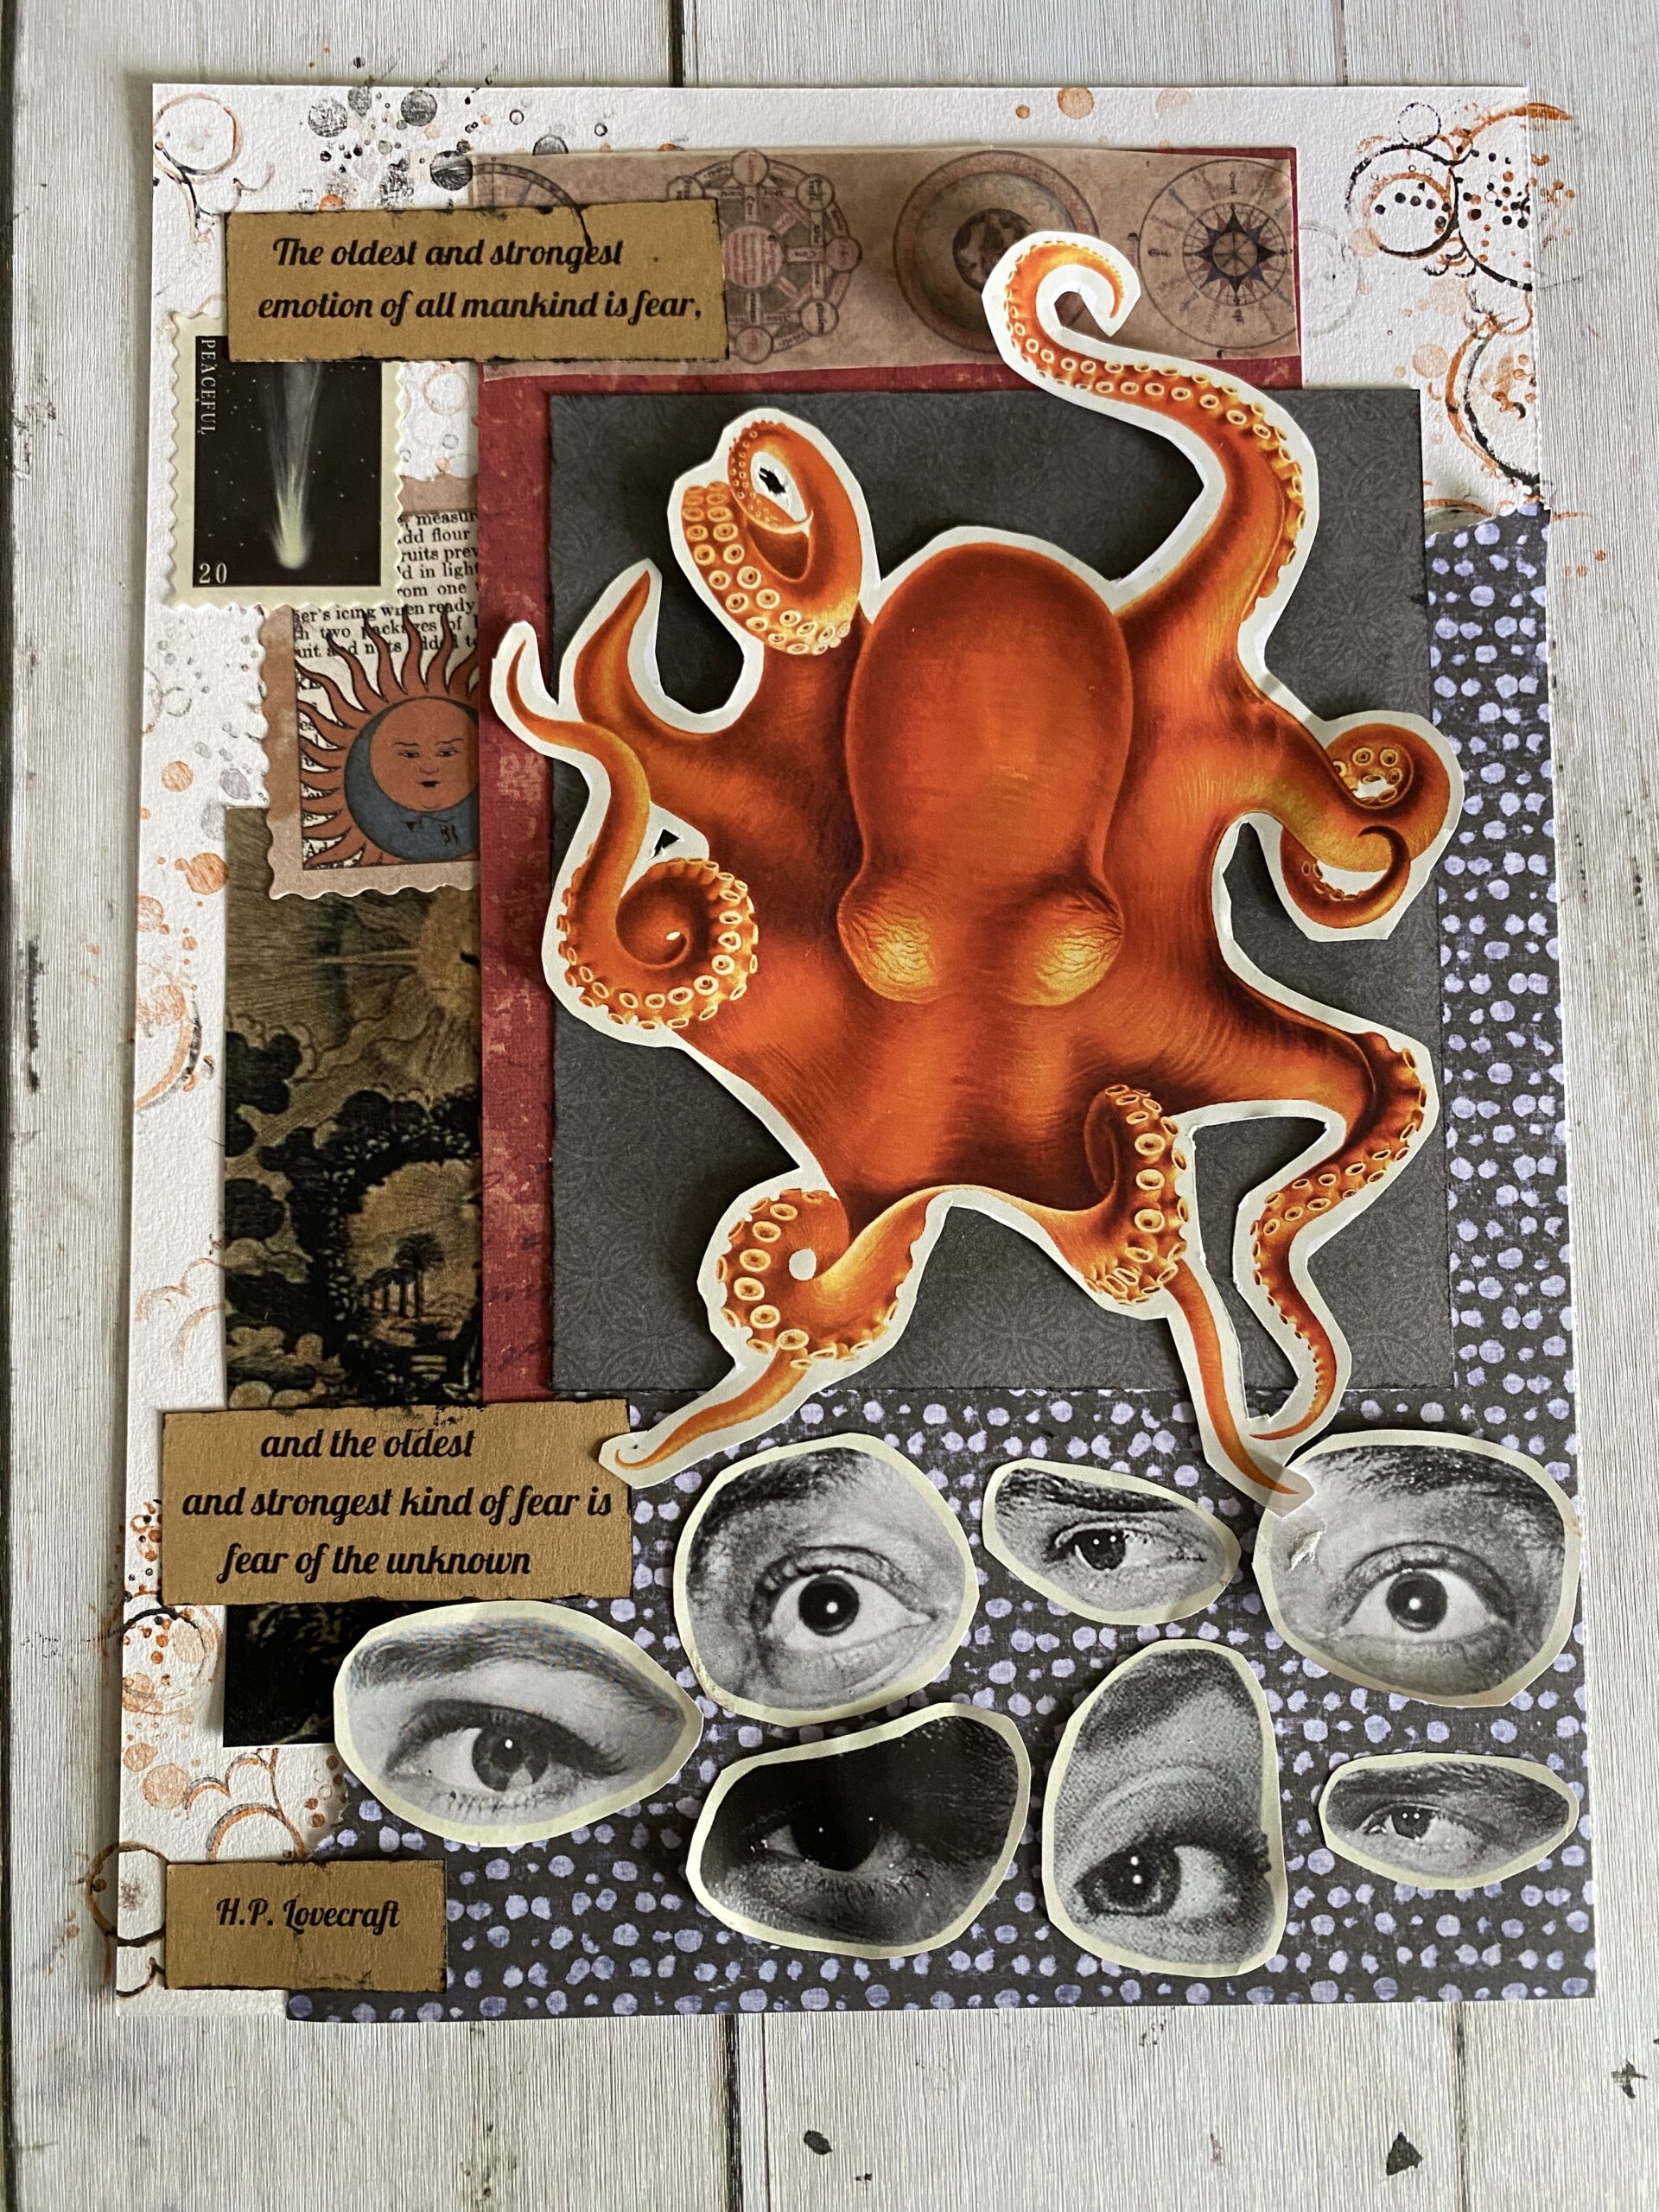 Lovecraft theme junk journal layout with orange octopus over black and white paper with black and white human eyes looking out at the viewer with a quote from HP Lovecraft